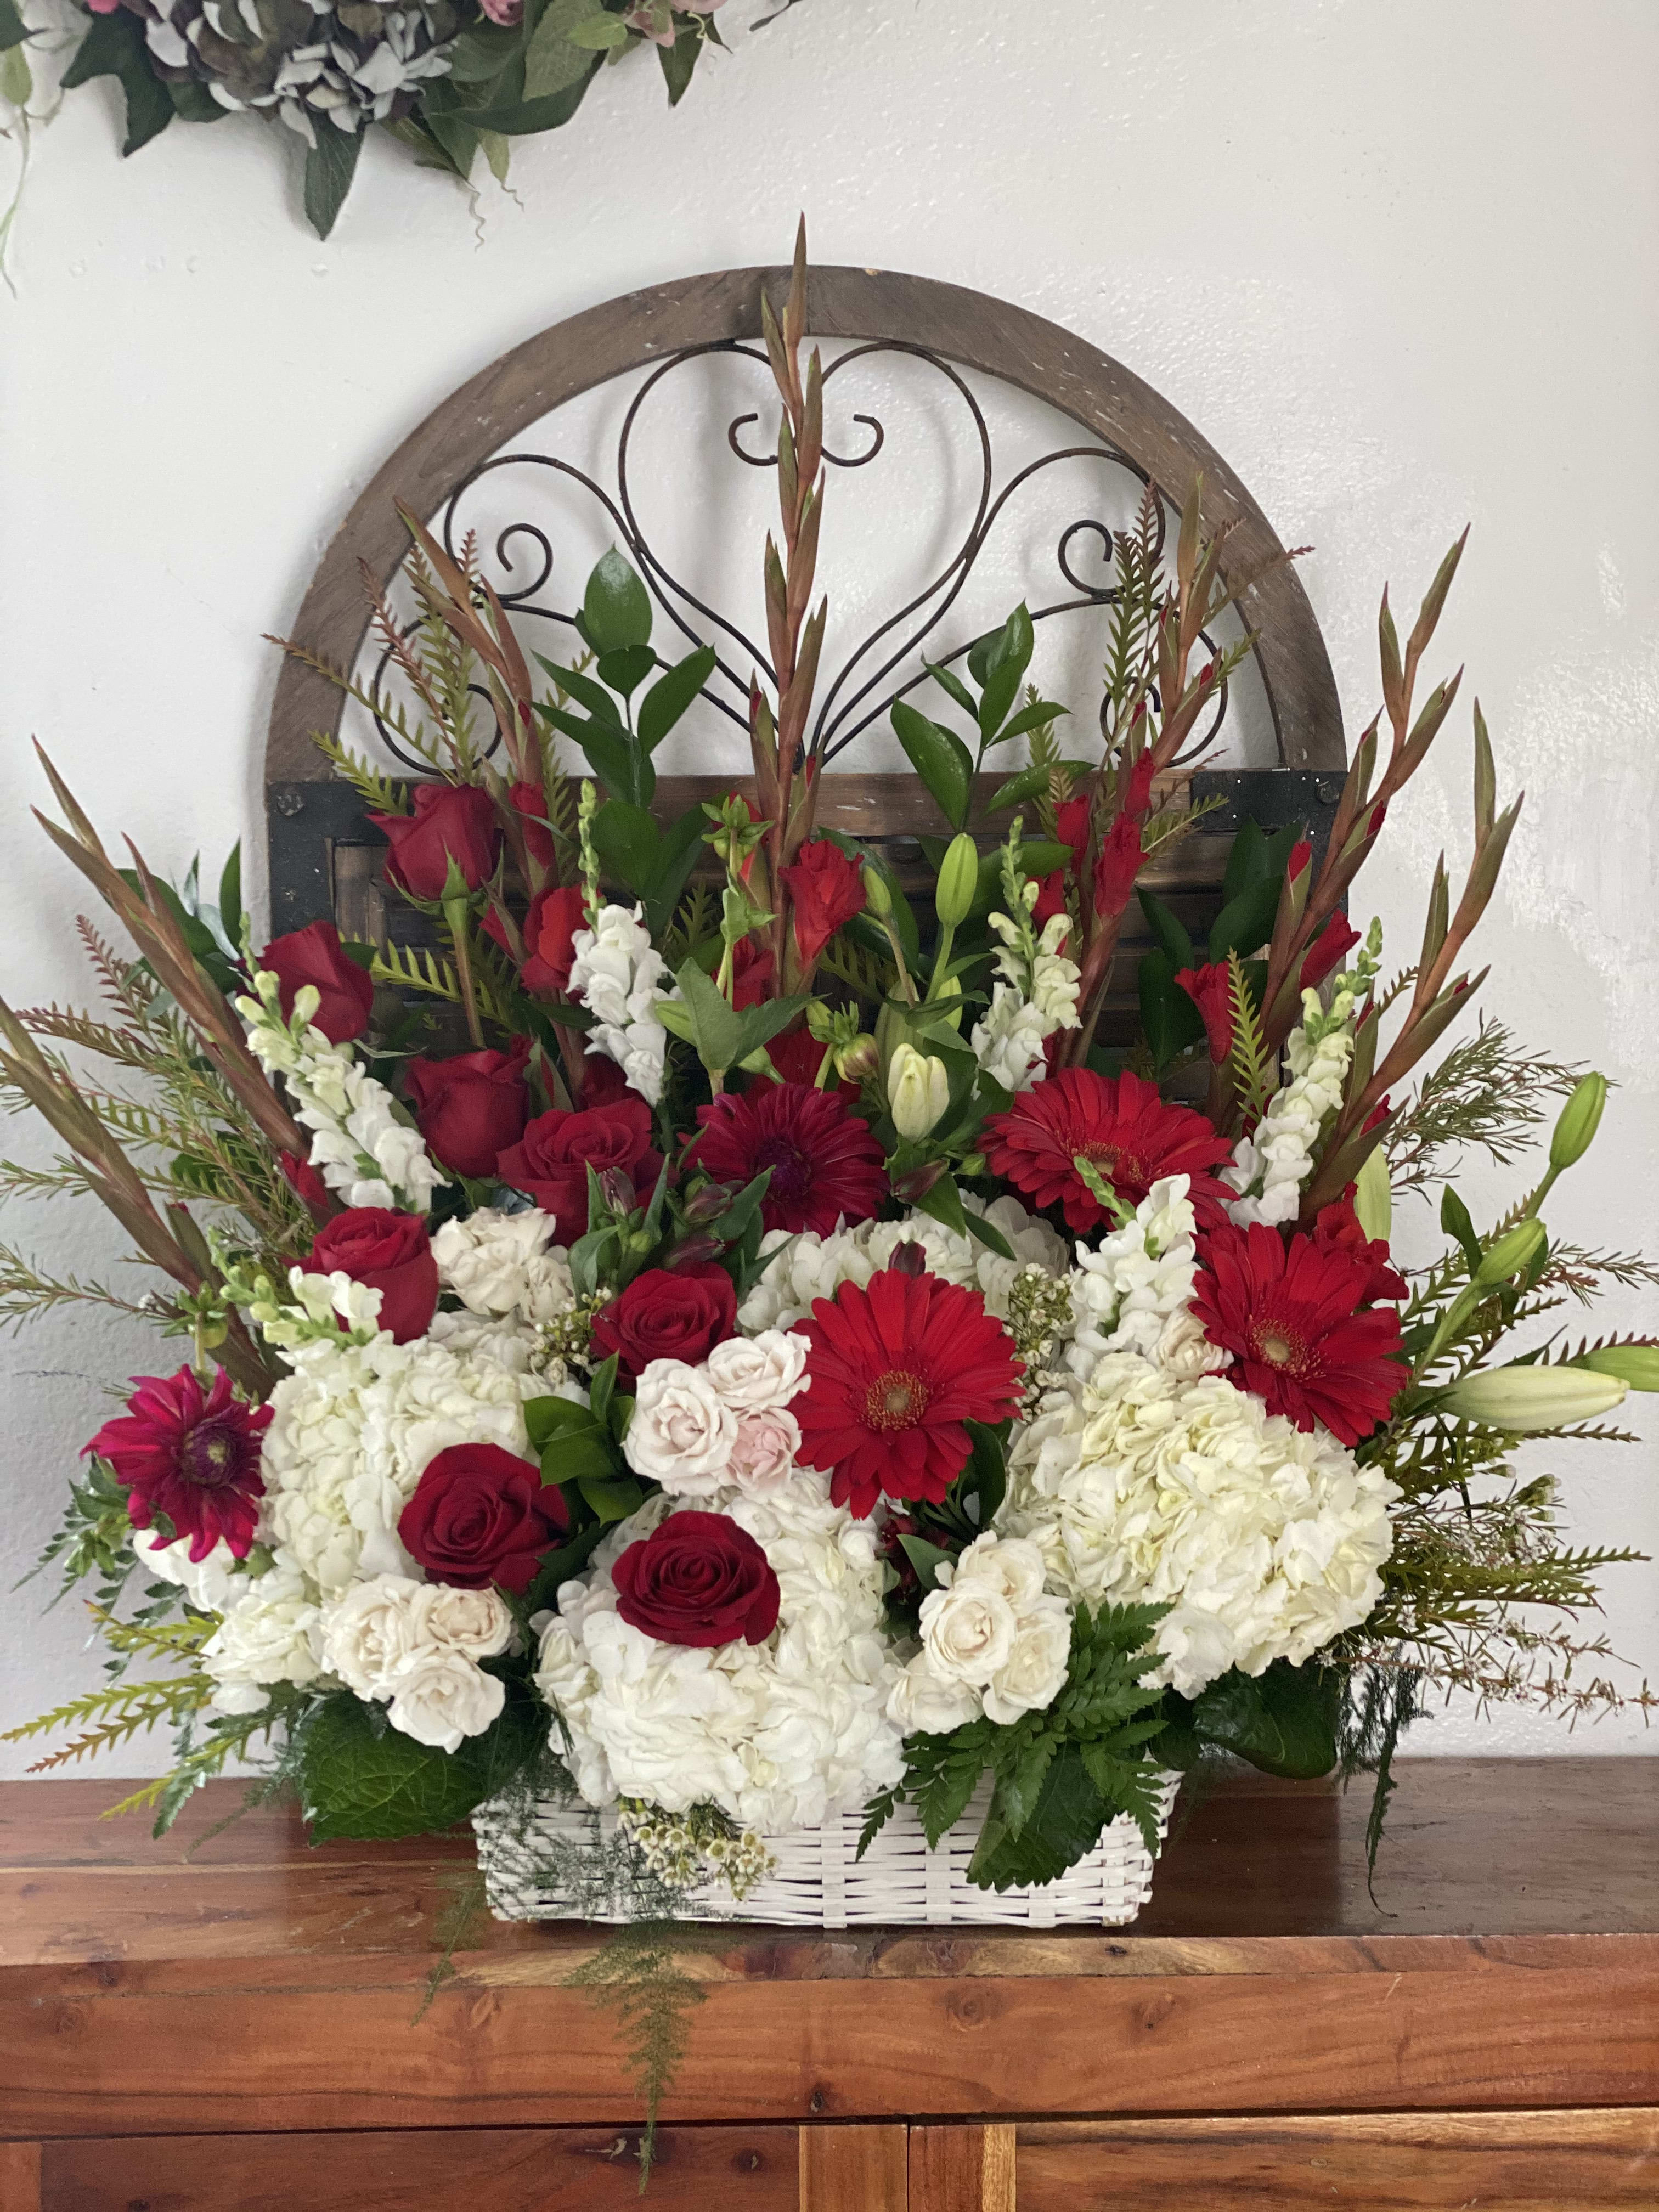 Lolypop - Basket awesome arrangement, in red and white color to impress.  Perfect for floor or tabletop display at a wake, for an altar or in a sanctuary at the funeral or to send to the home of grieving family and friends.